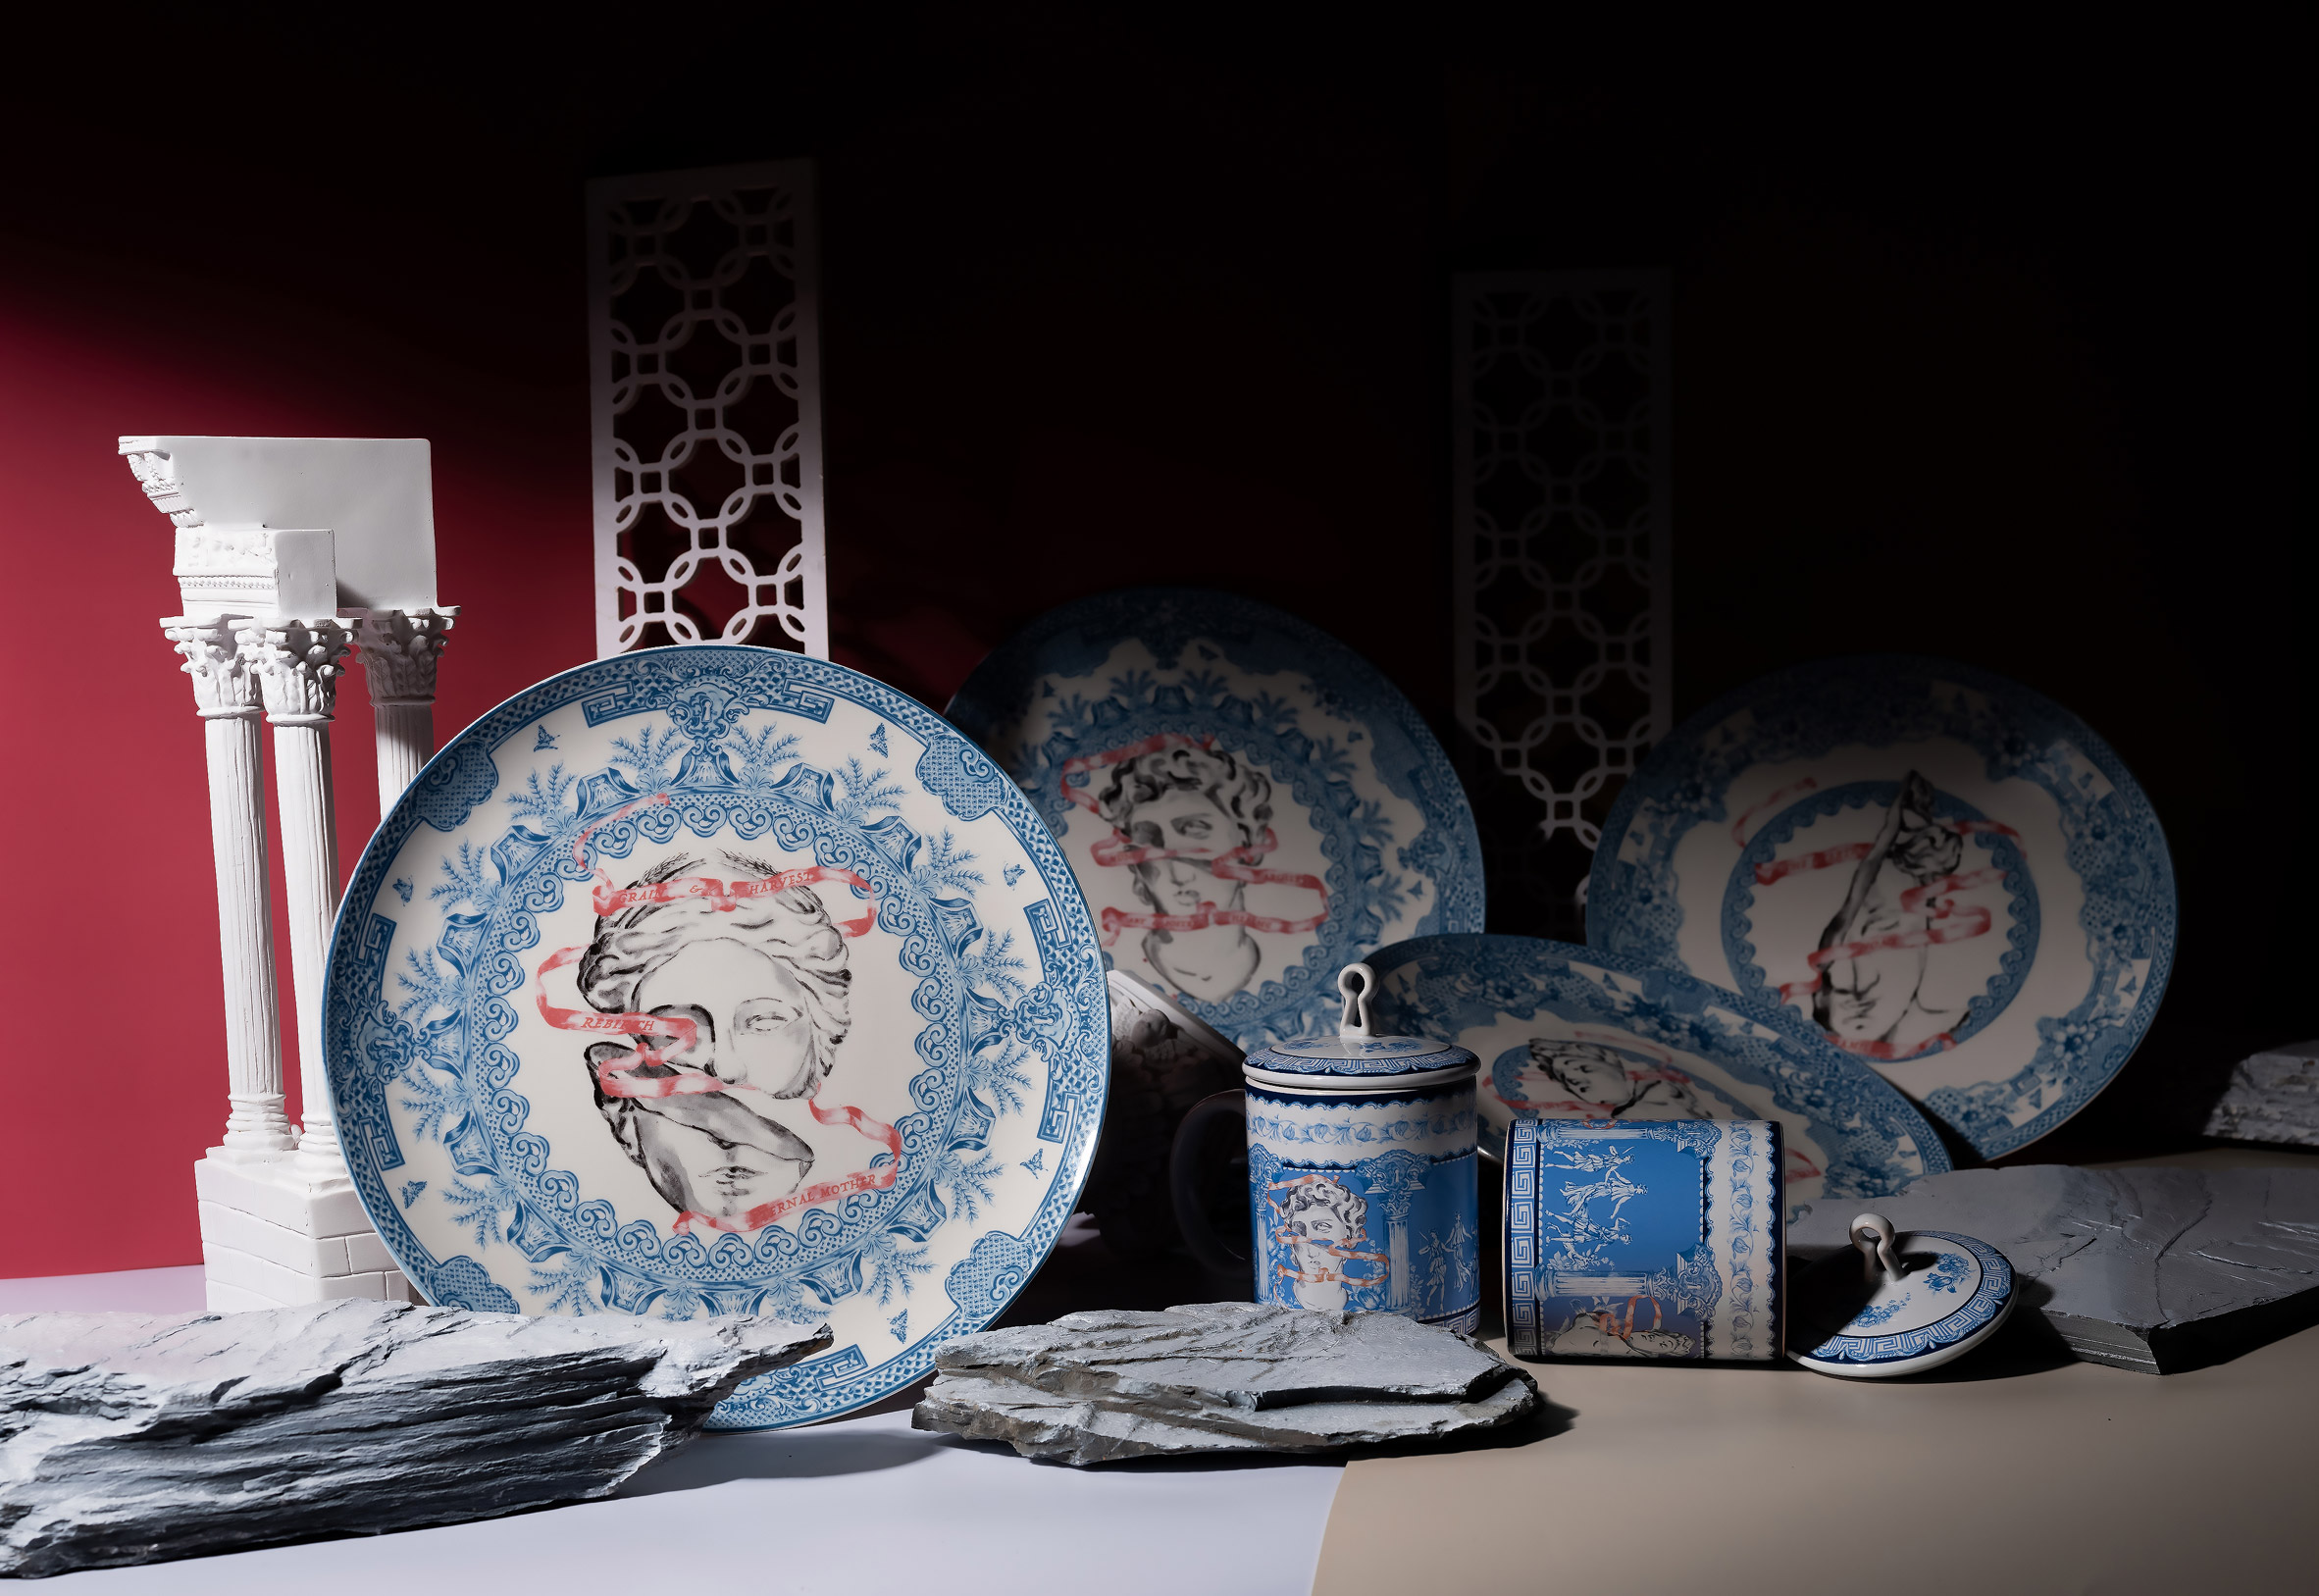 Blue and white china plates on dark backdrop